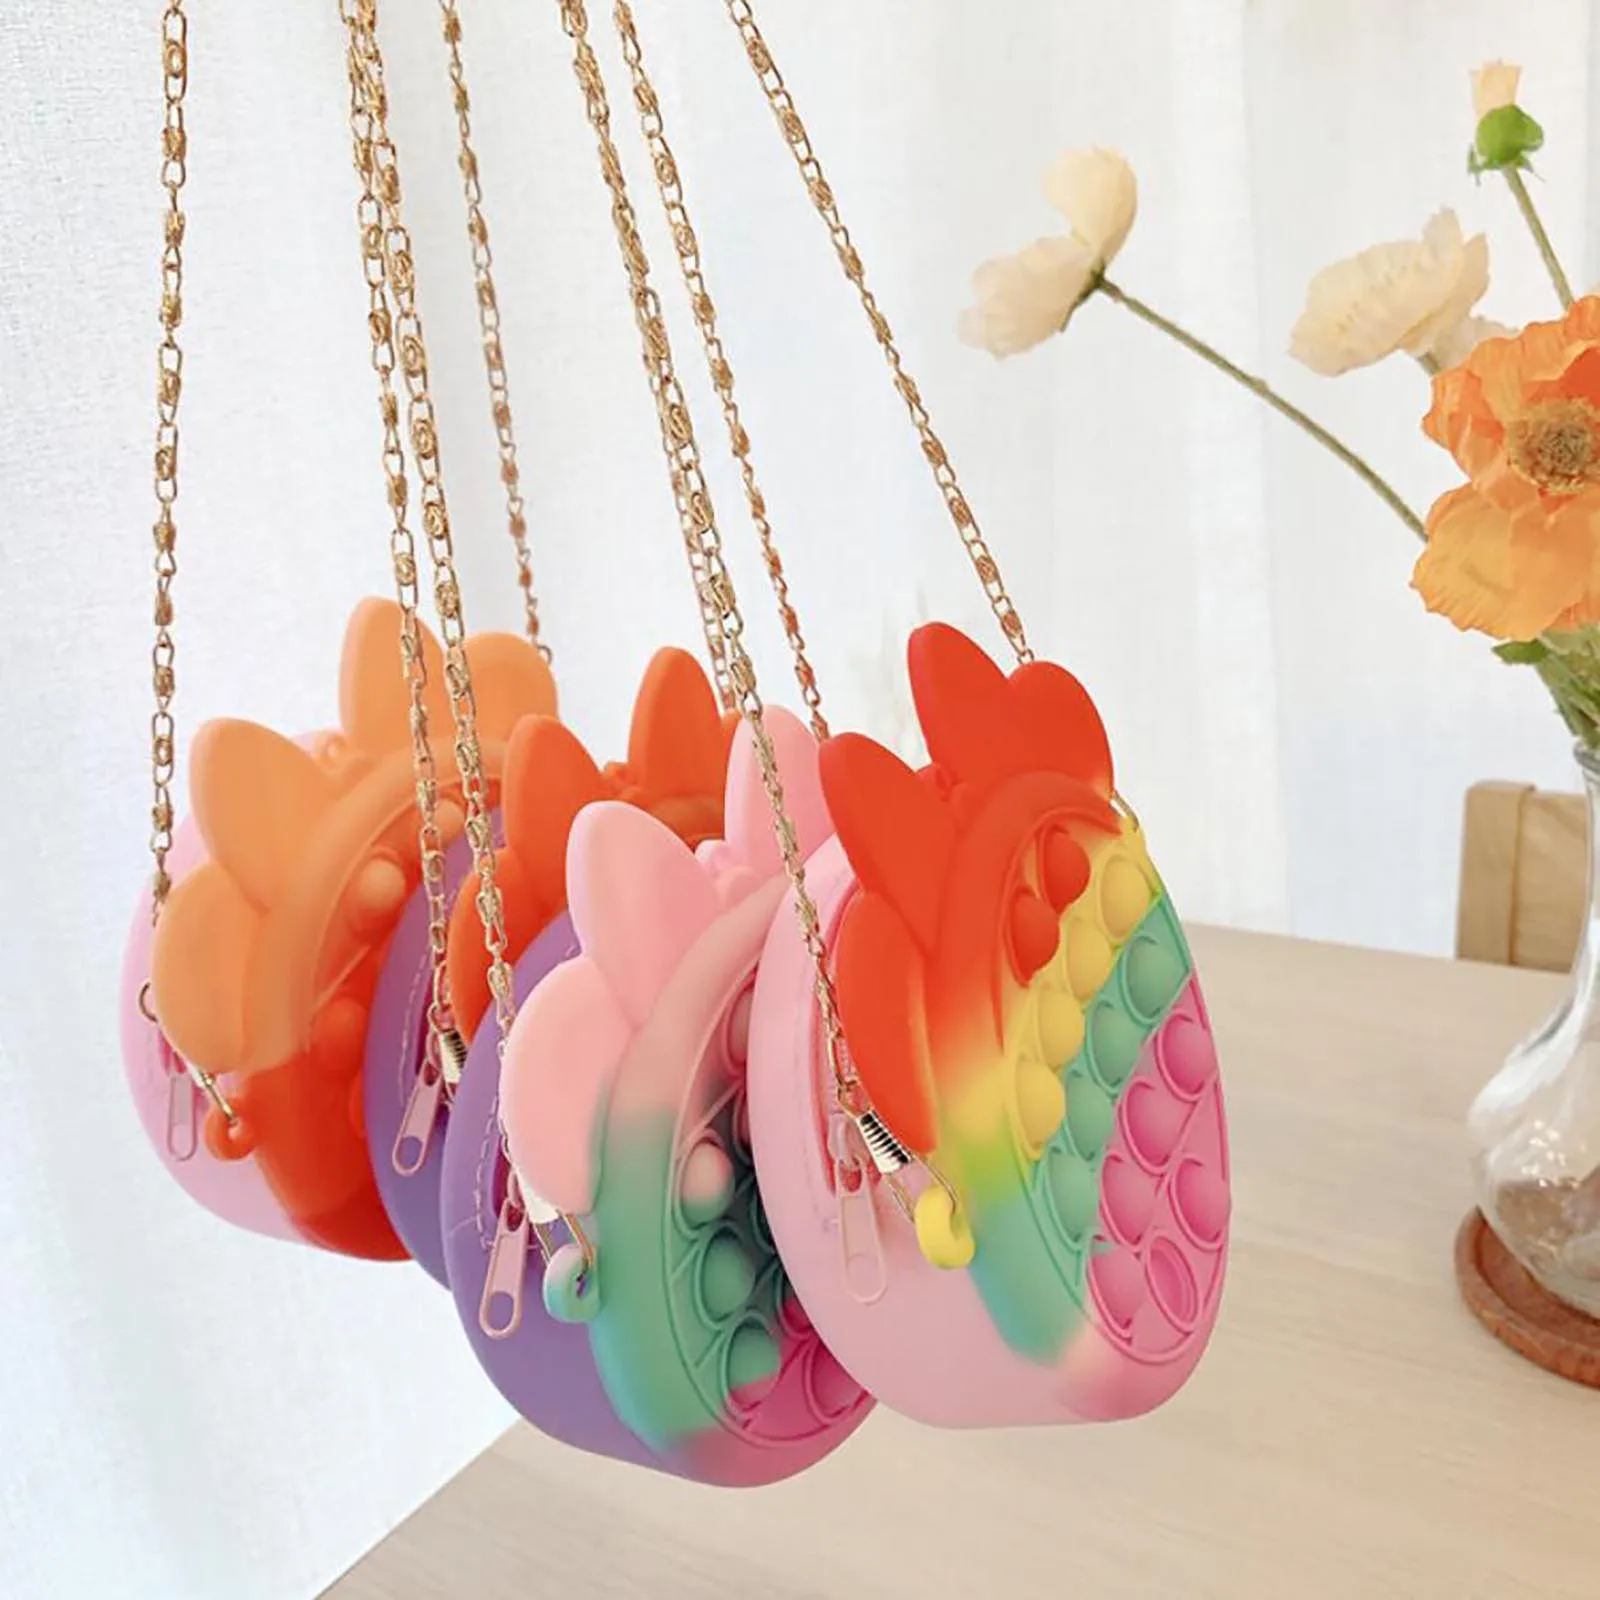 dumplings stress ball Fashion Fidget Toys Push Bubbles Toy Rainbow Unicorn Coin Purse Wallet Ladies Bag Silica Simple Dimple Crossbody Bags For Girls squeezy toys